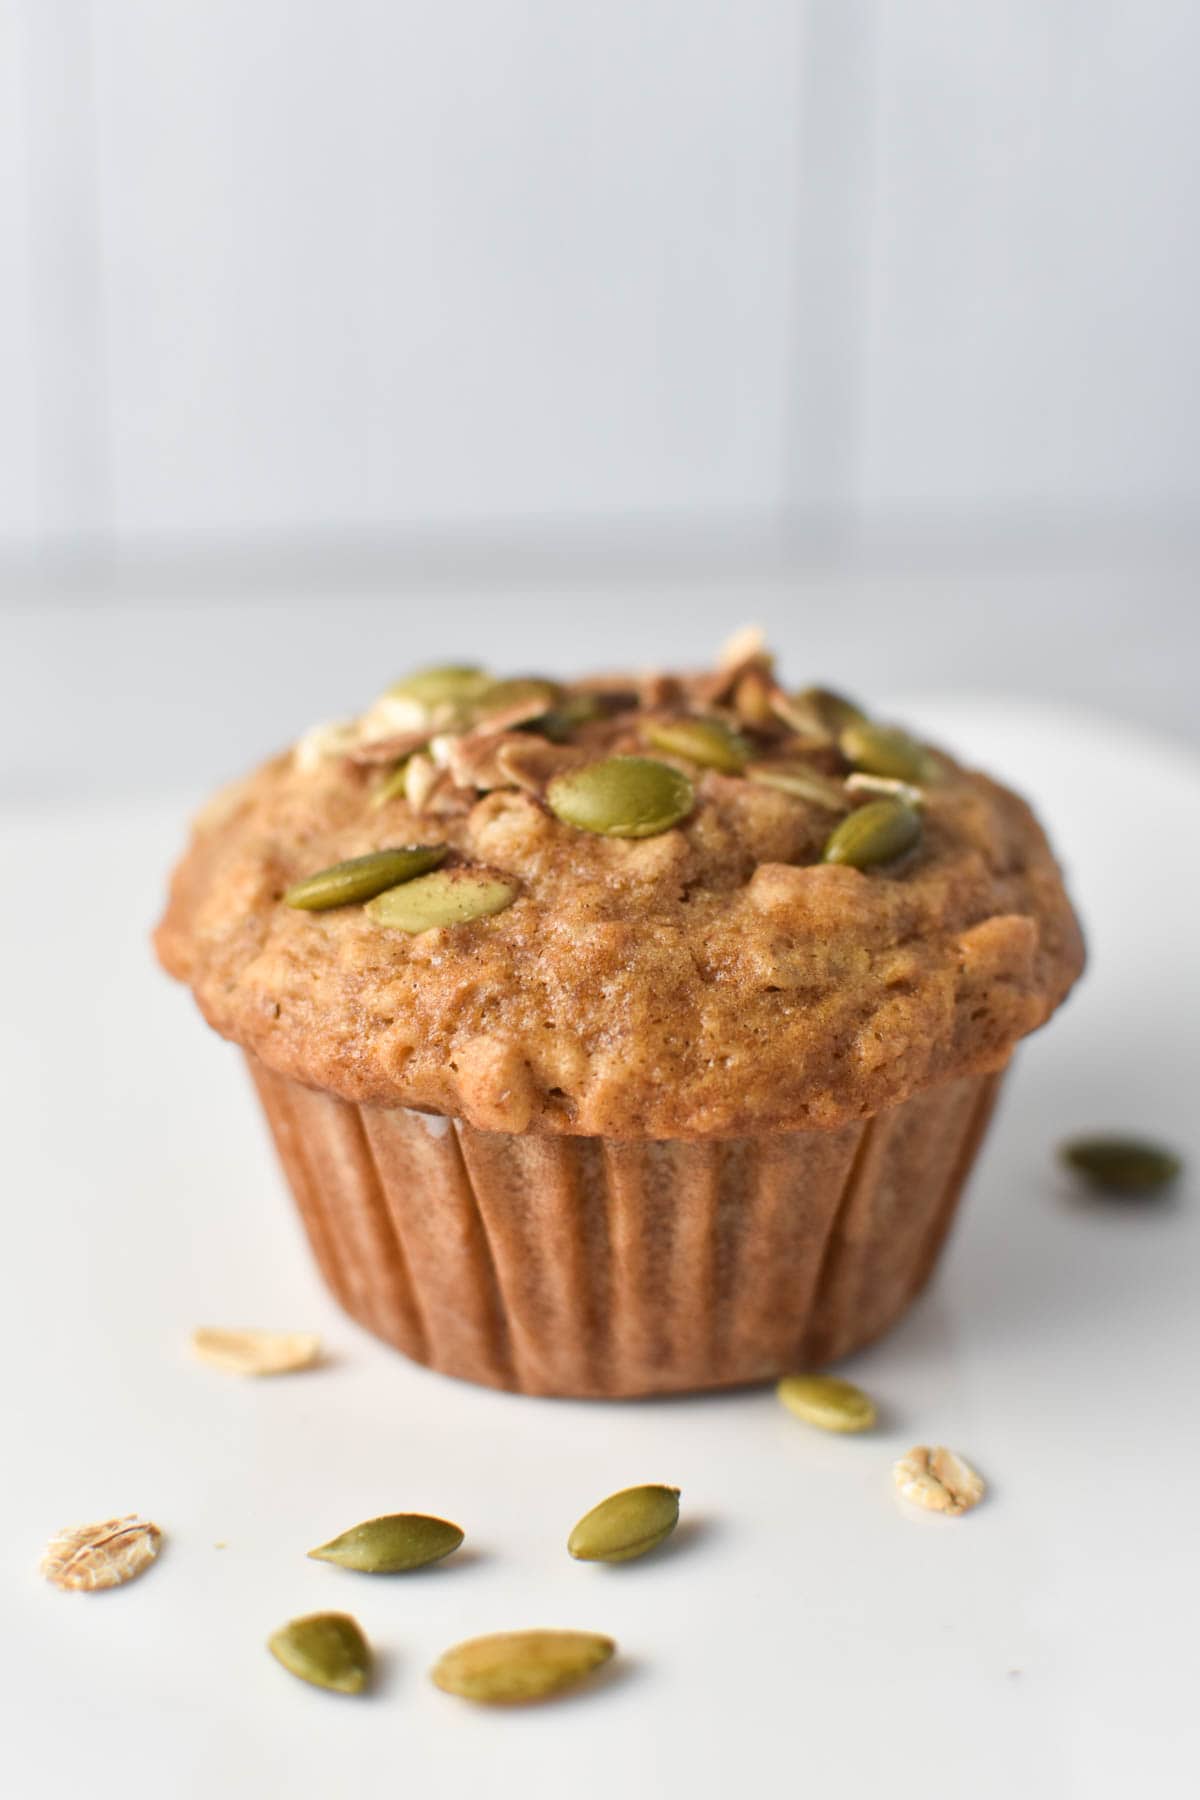 A muffin topped with pepitas and oats on a white plate.